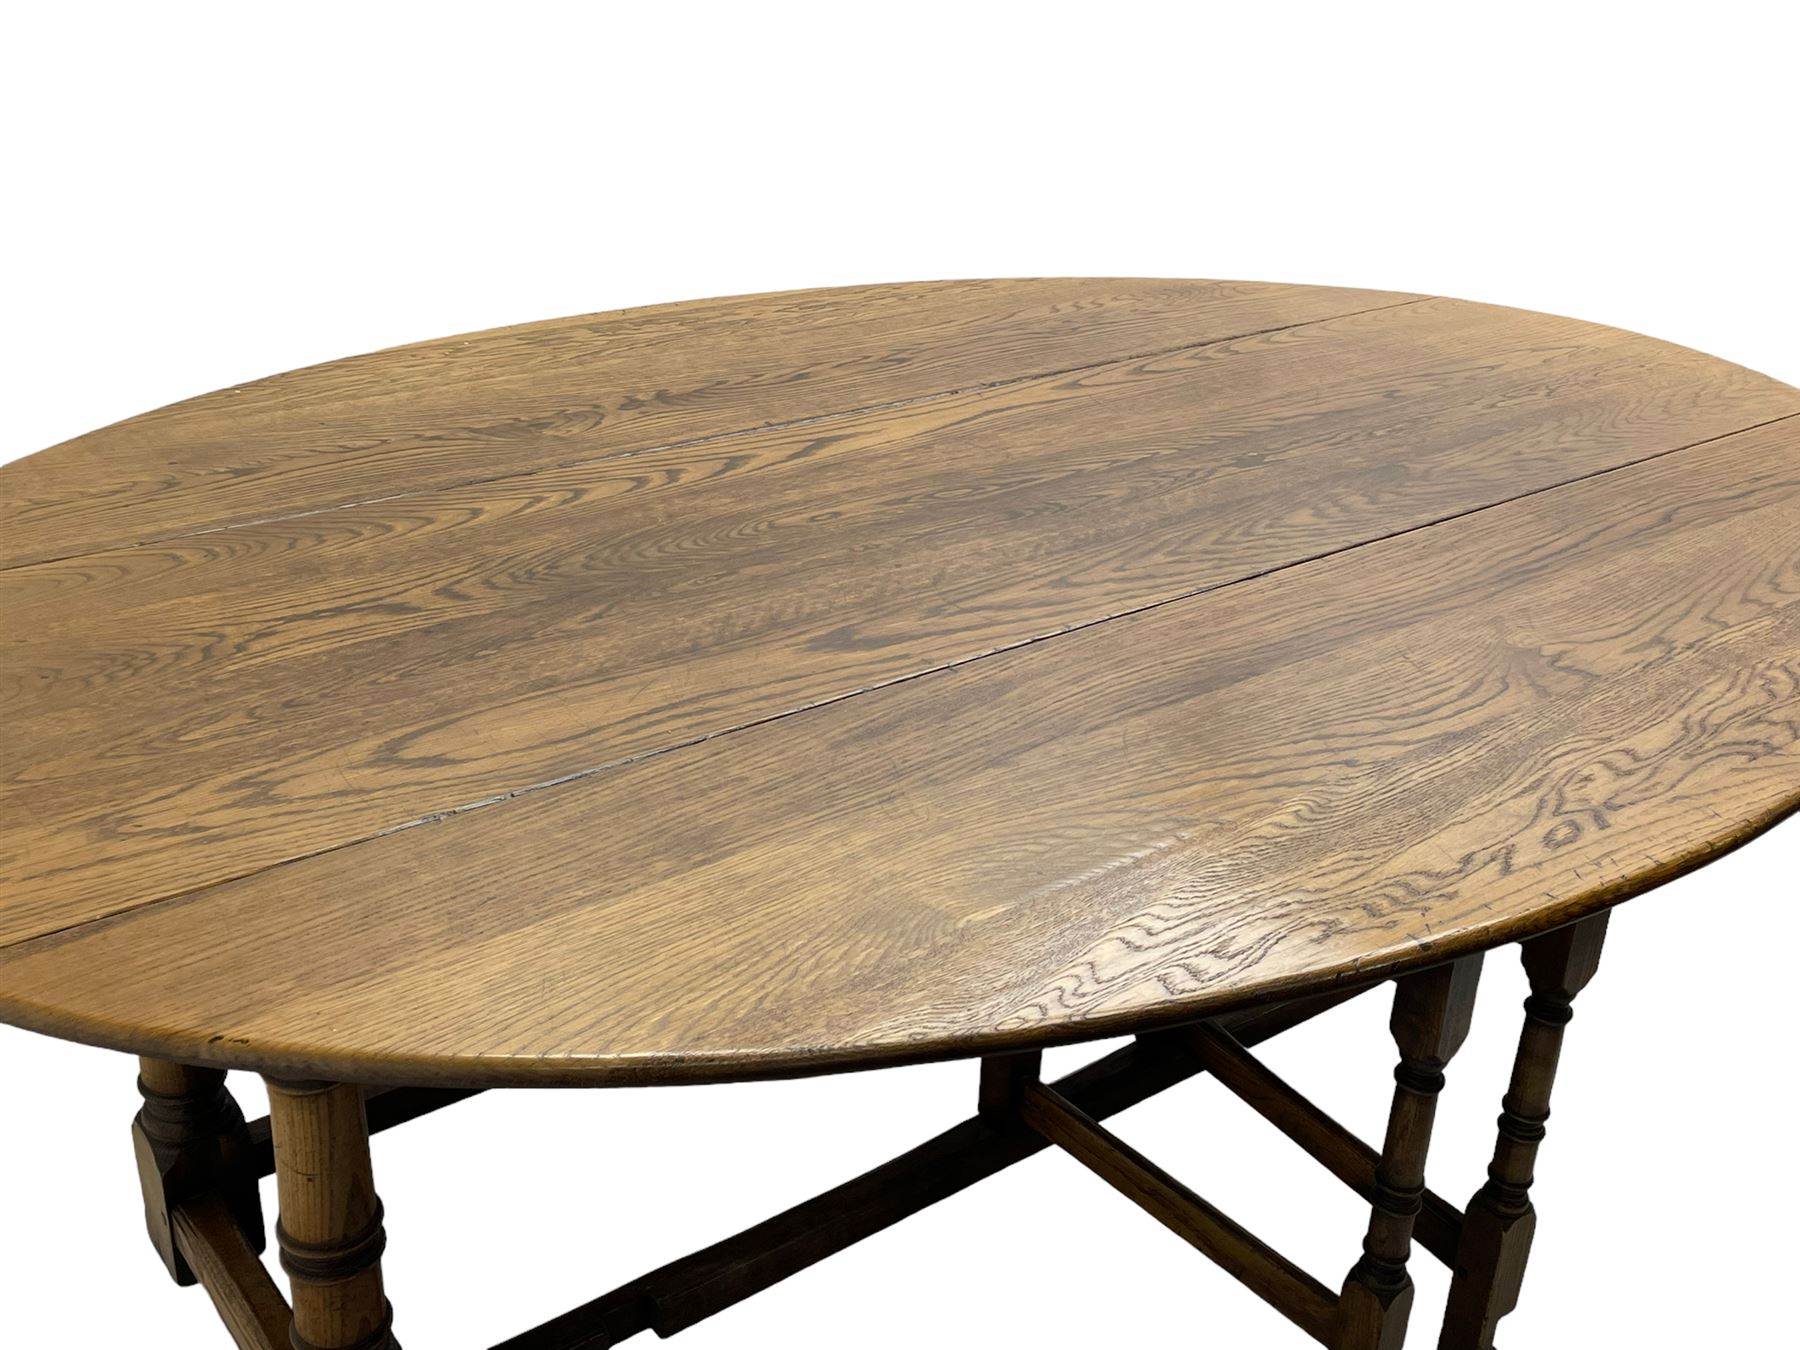 Large 18th century design oak wake or dining table - Image 4 of 12